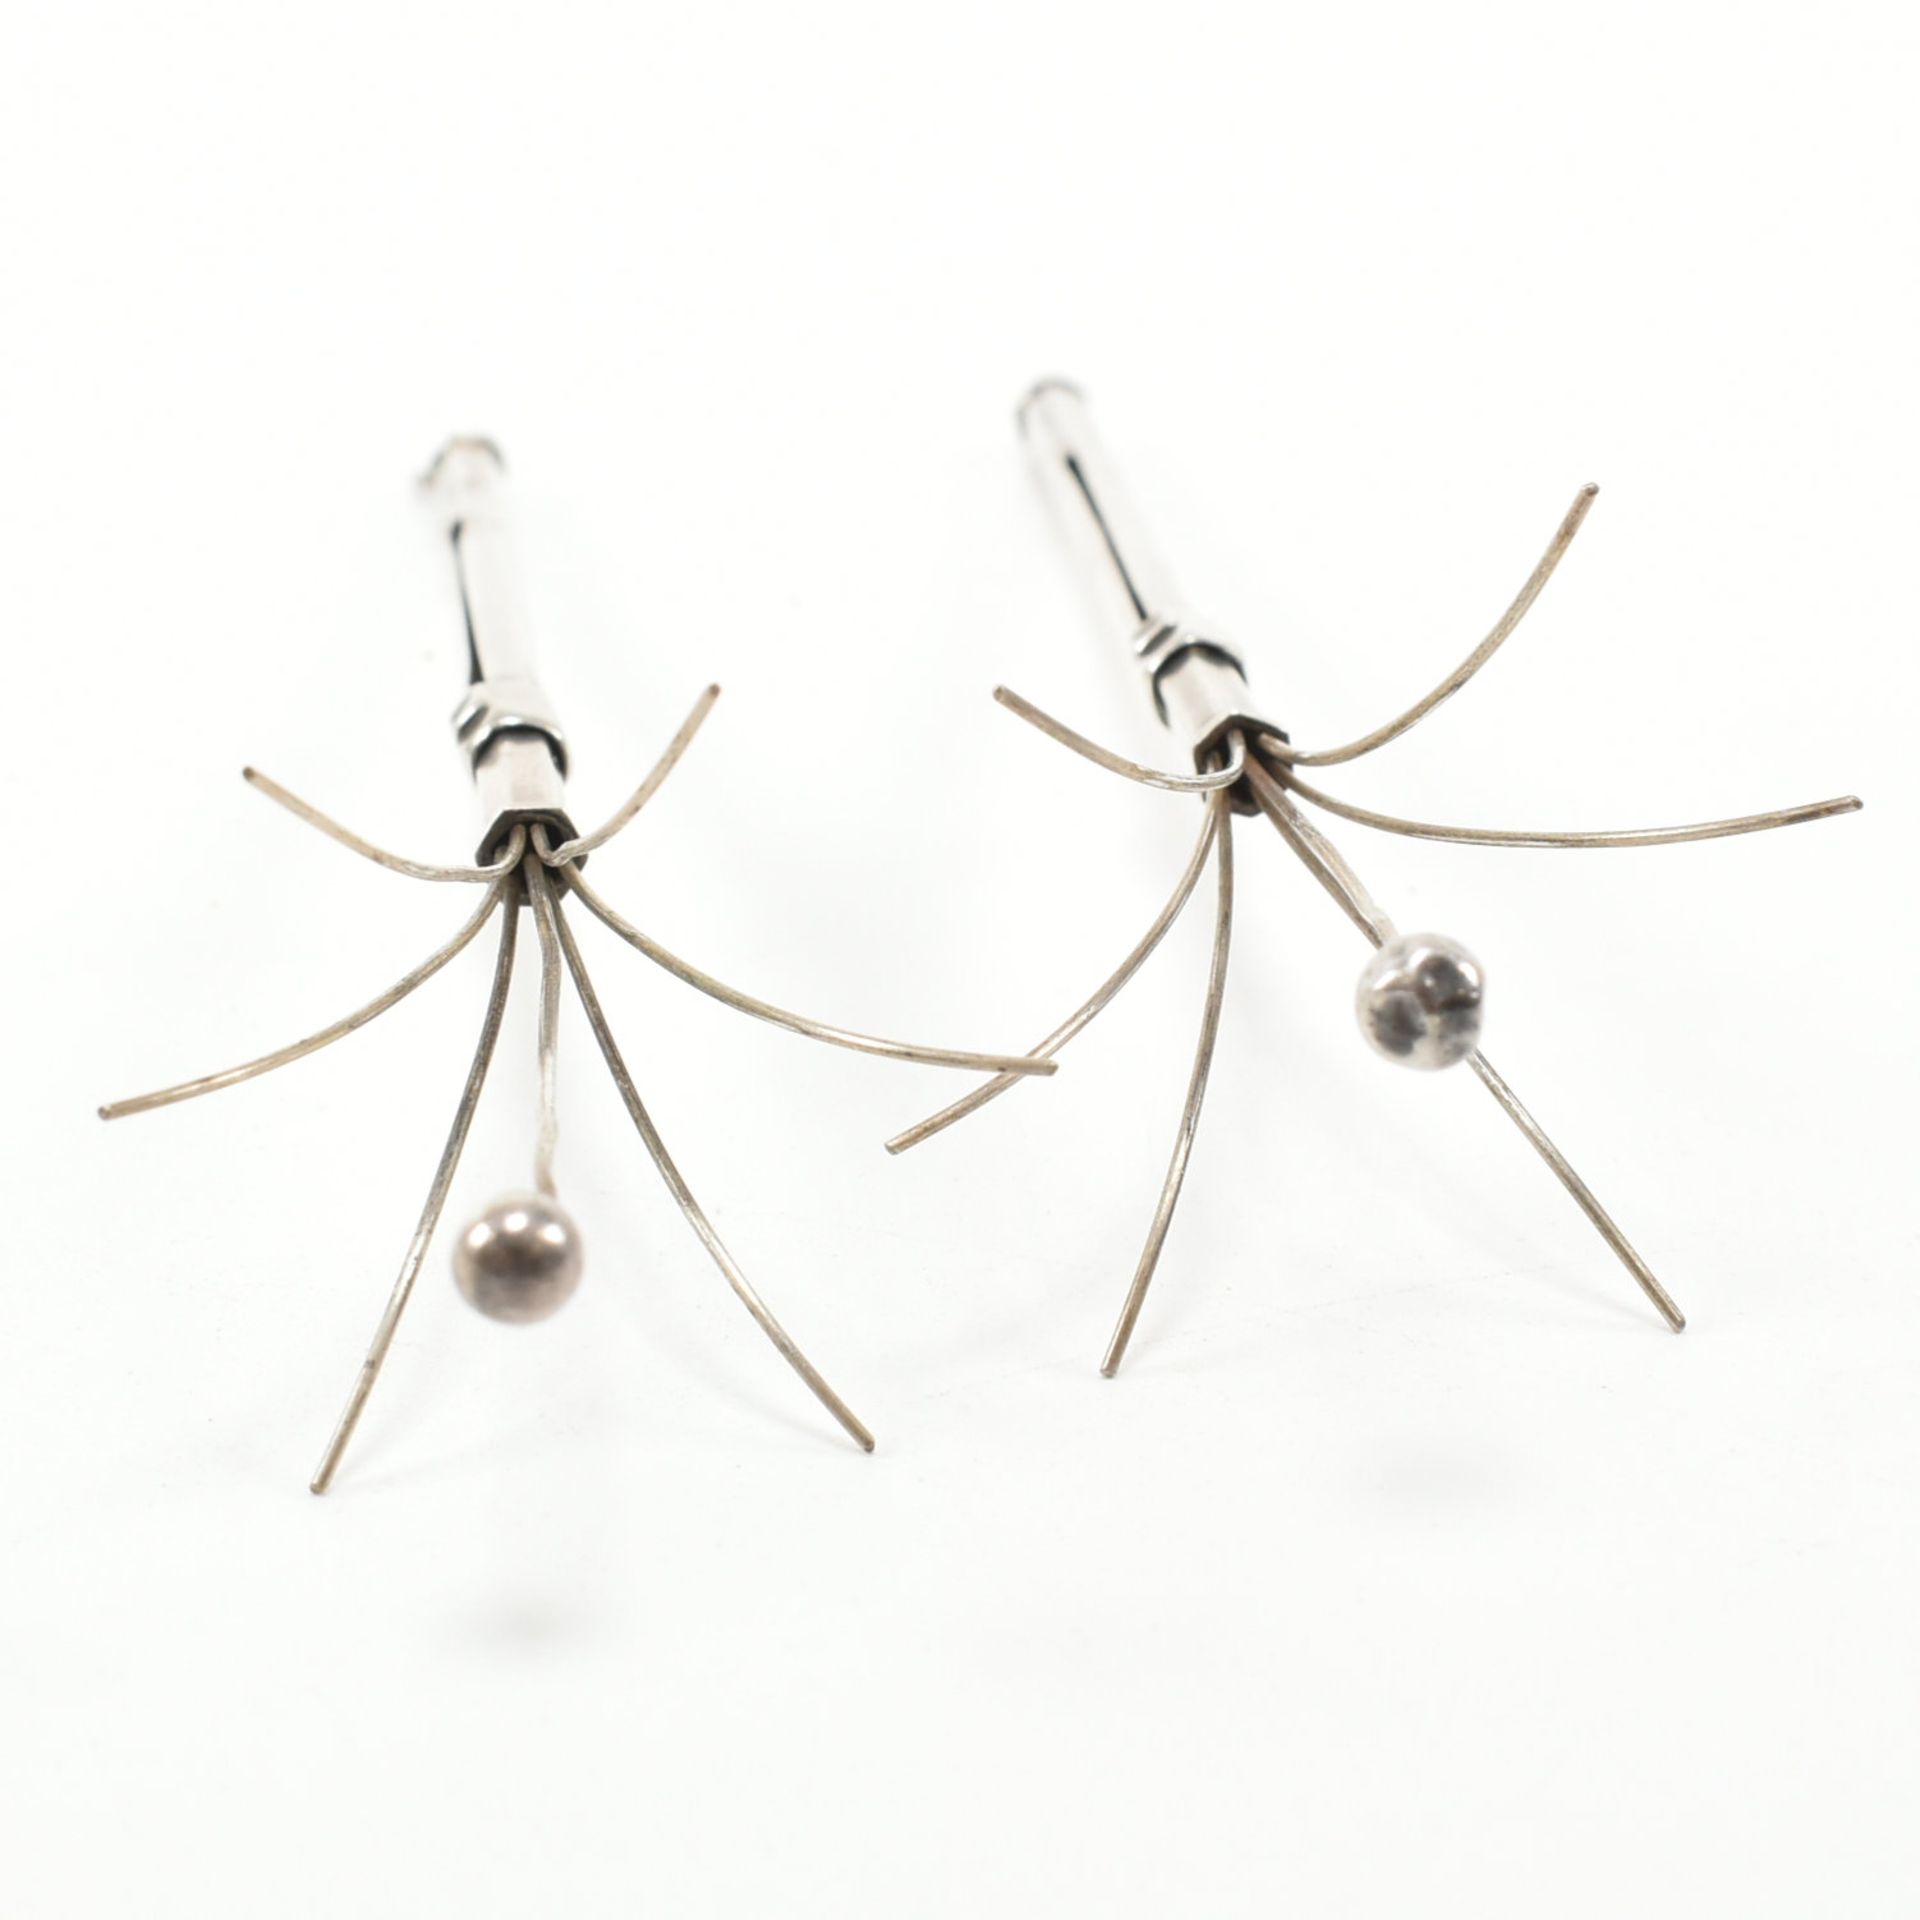 TWO SILVER SWIZZLE STICK CHAMPAGNE COCKTAIL STIRERS - Image 10 of 11